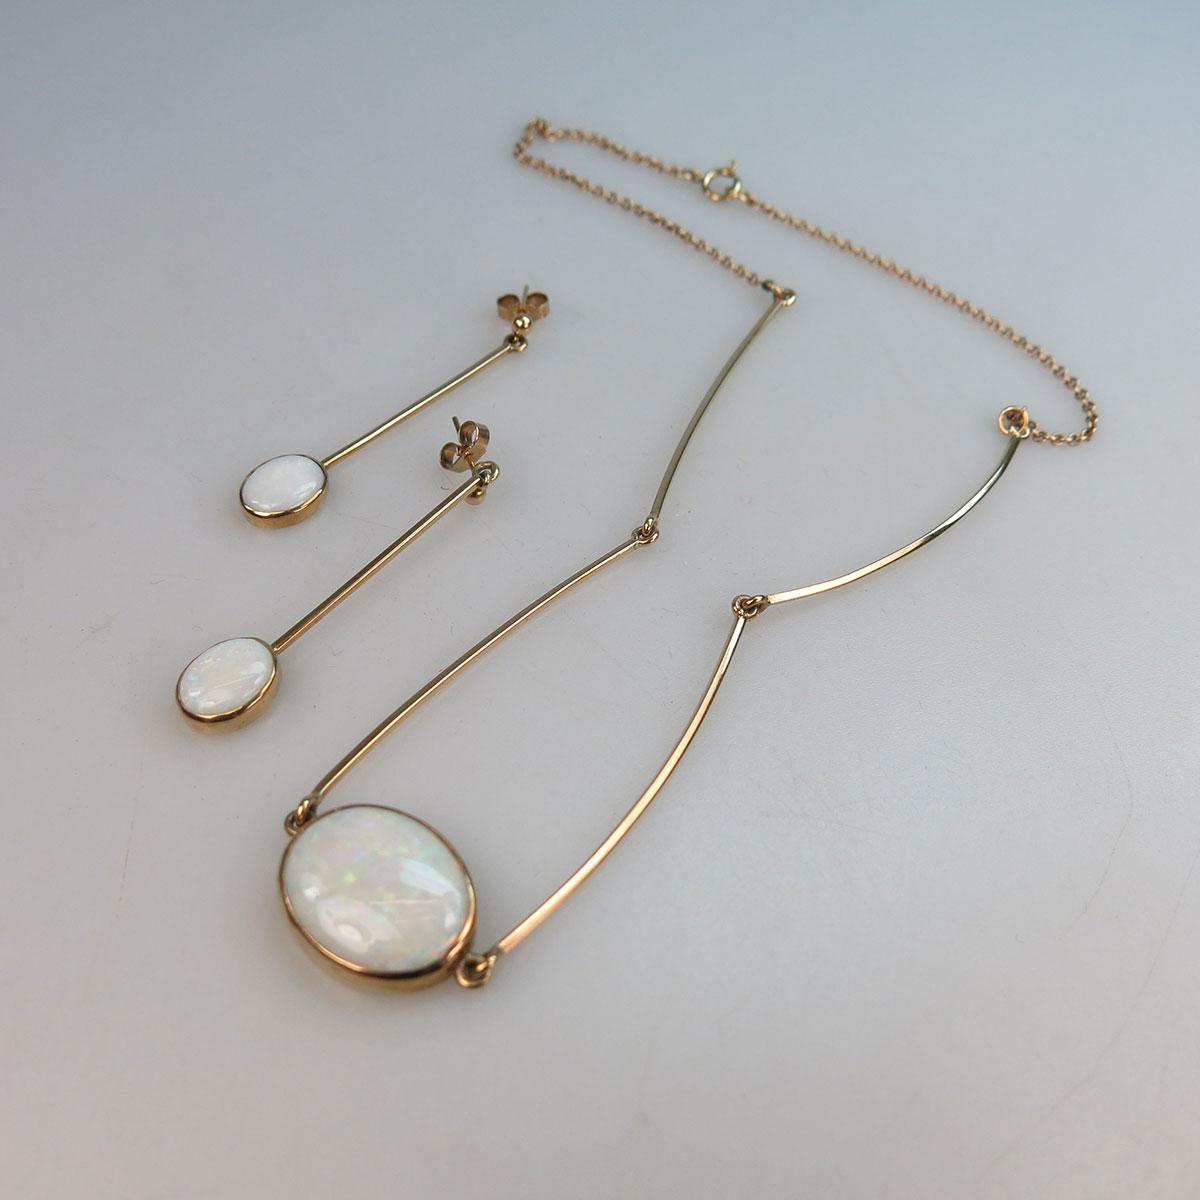 English 9k Yellow Gold Necklace And Drop Earrings set with oval opal cabochons